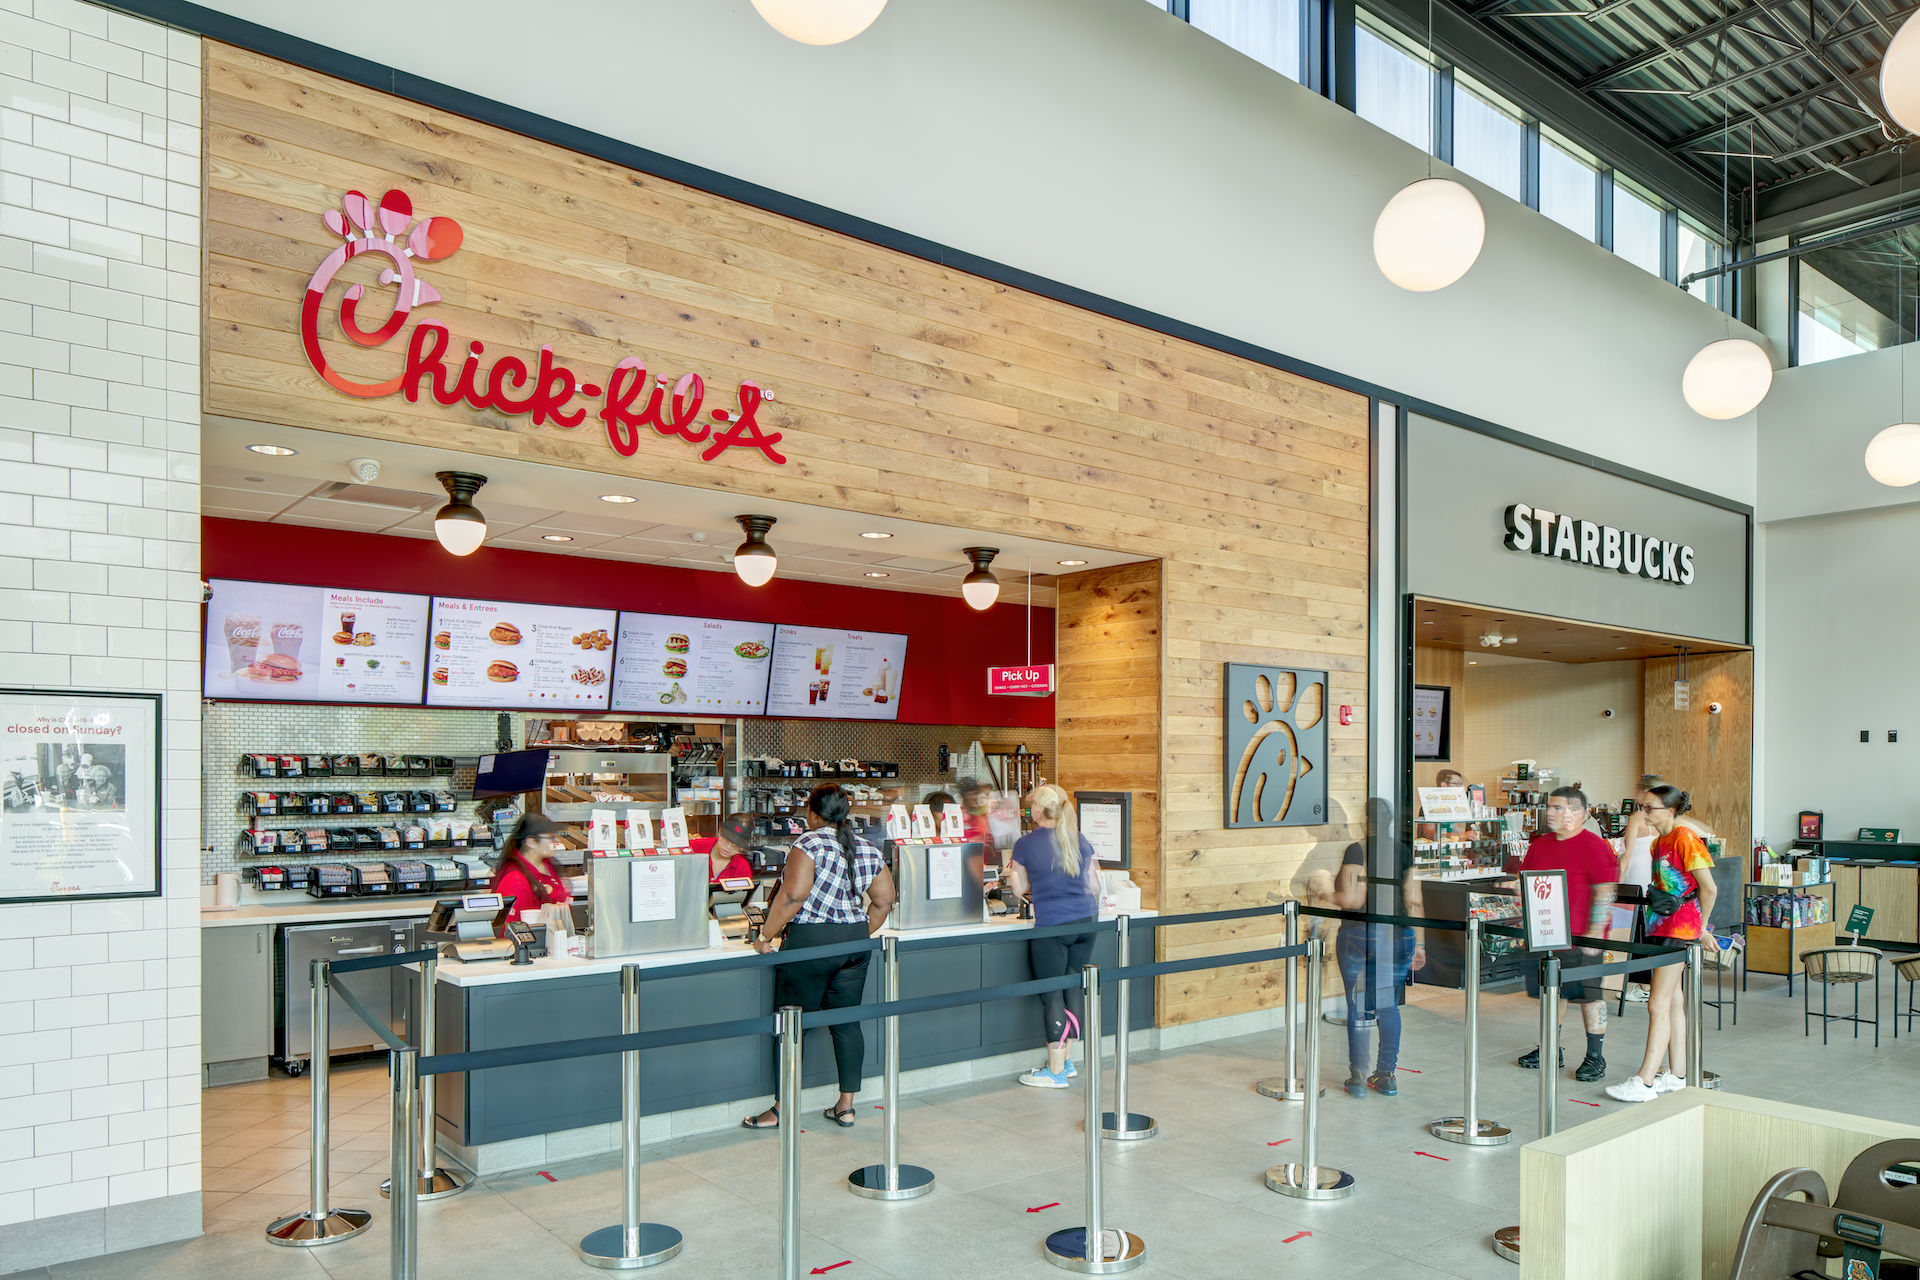 Chick-fil-A Opens At Garden State Plaza